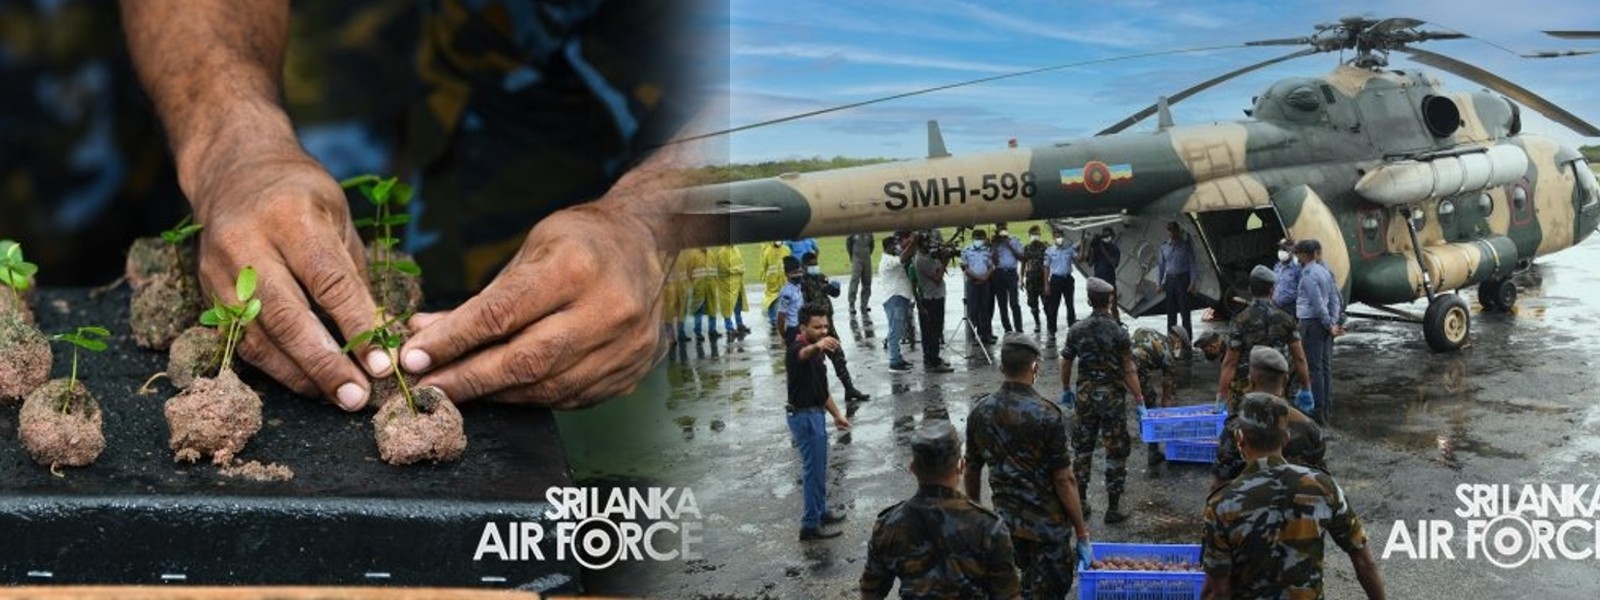 SLAF executes another Aerial Seed Bombing Operation